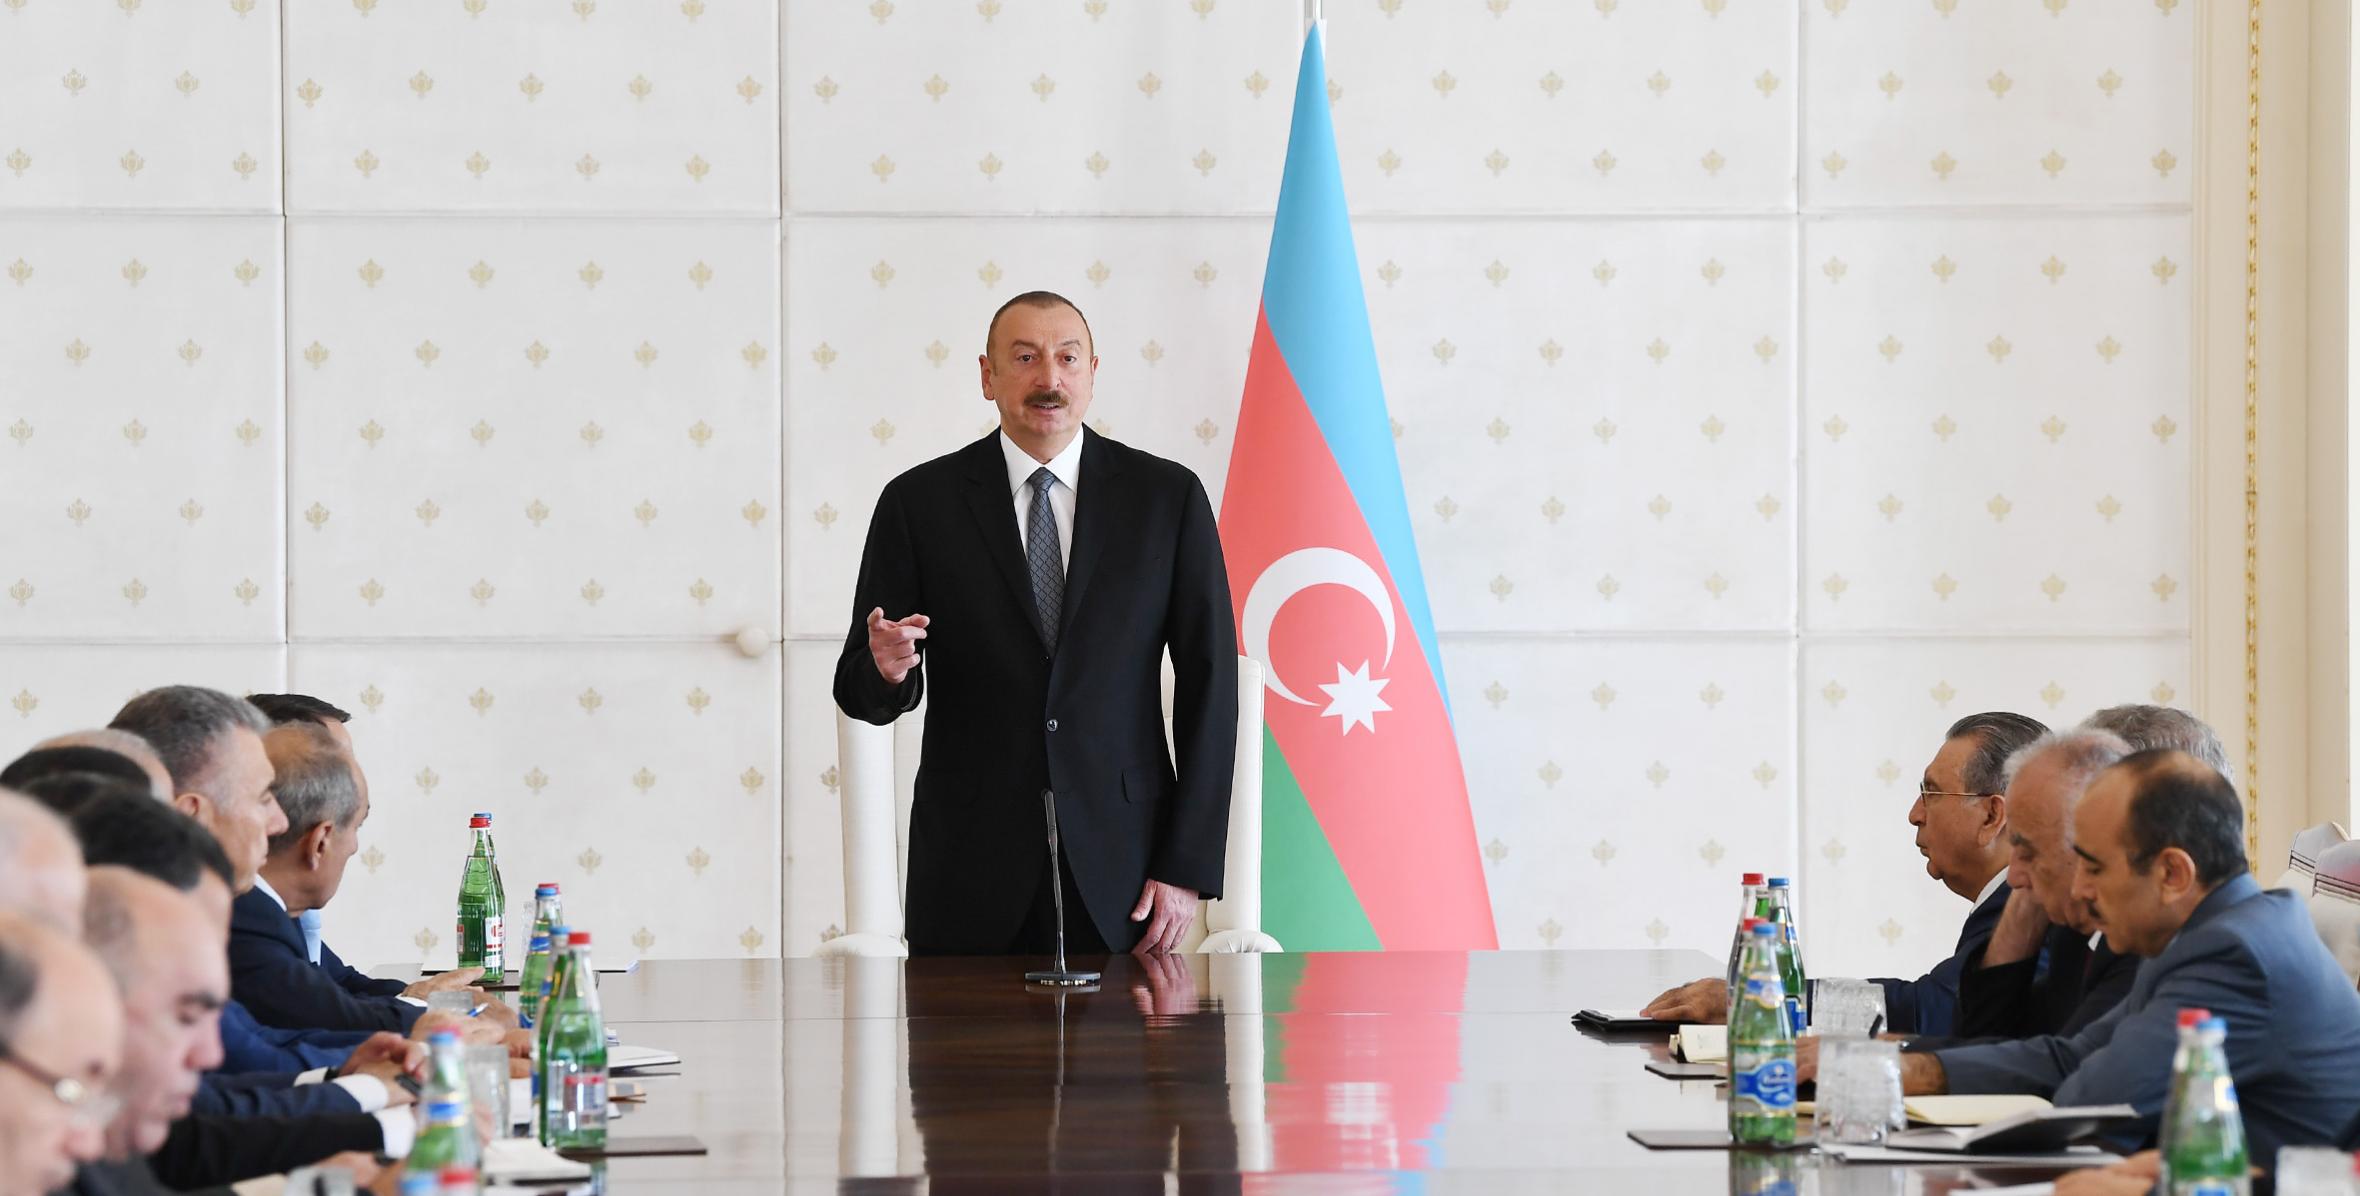 Opening speech by Ilham Aliyev at the Cabinet of Ministers dedicated to results of socio-economic development in first half of 2018 and future objectives